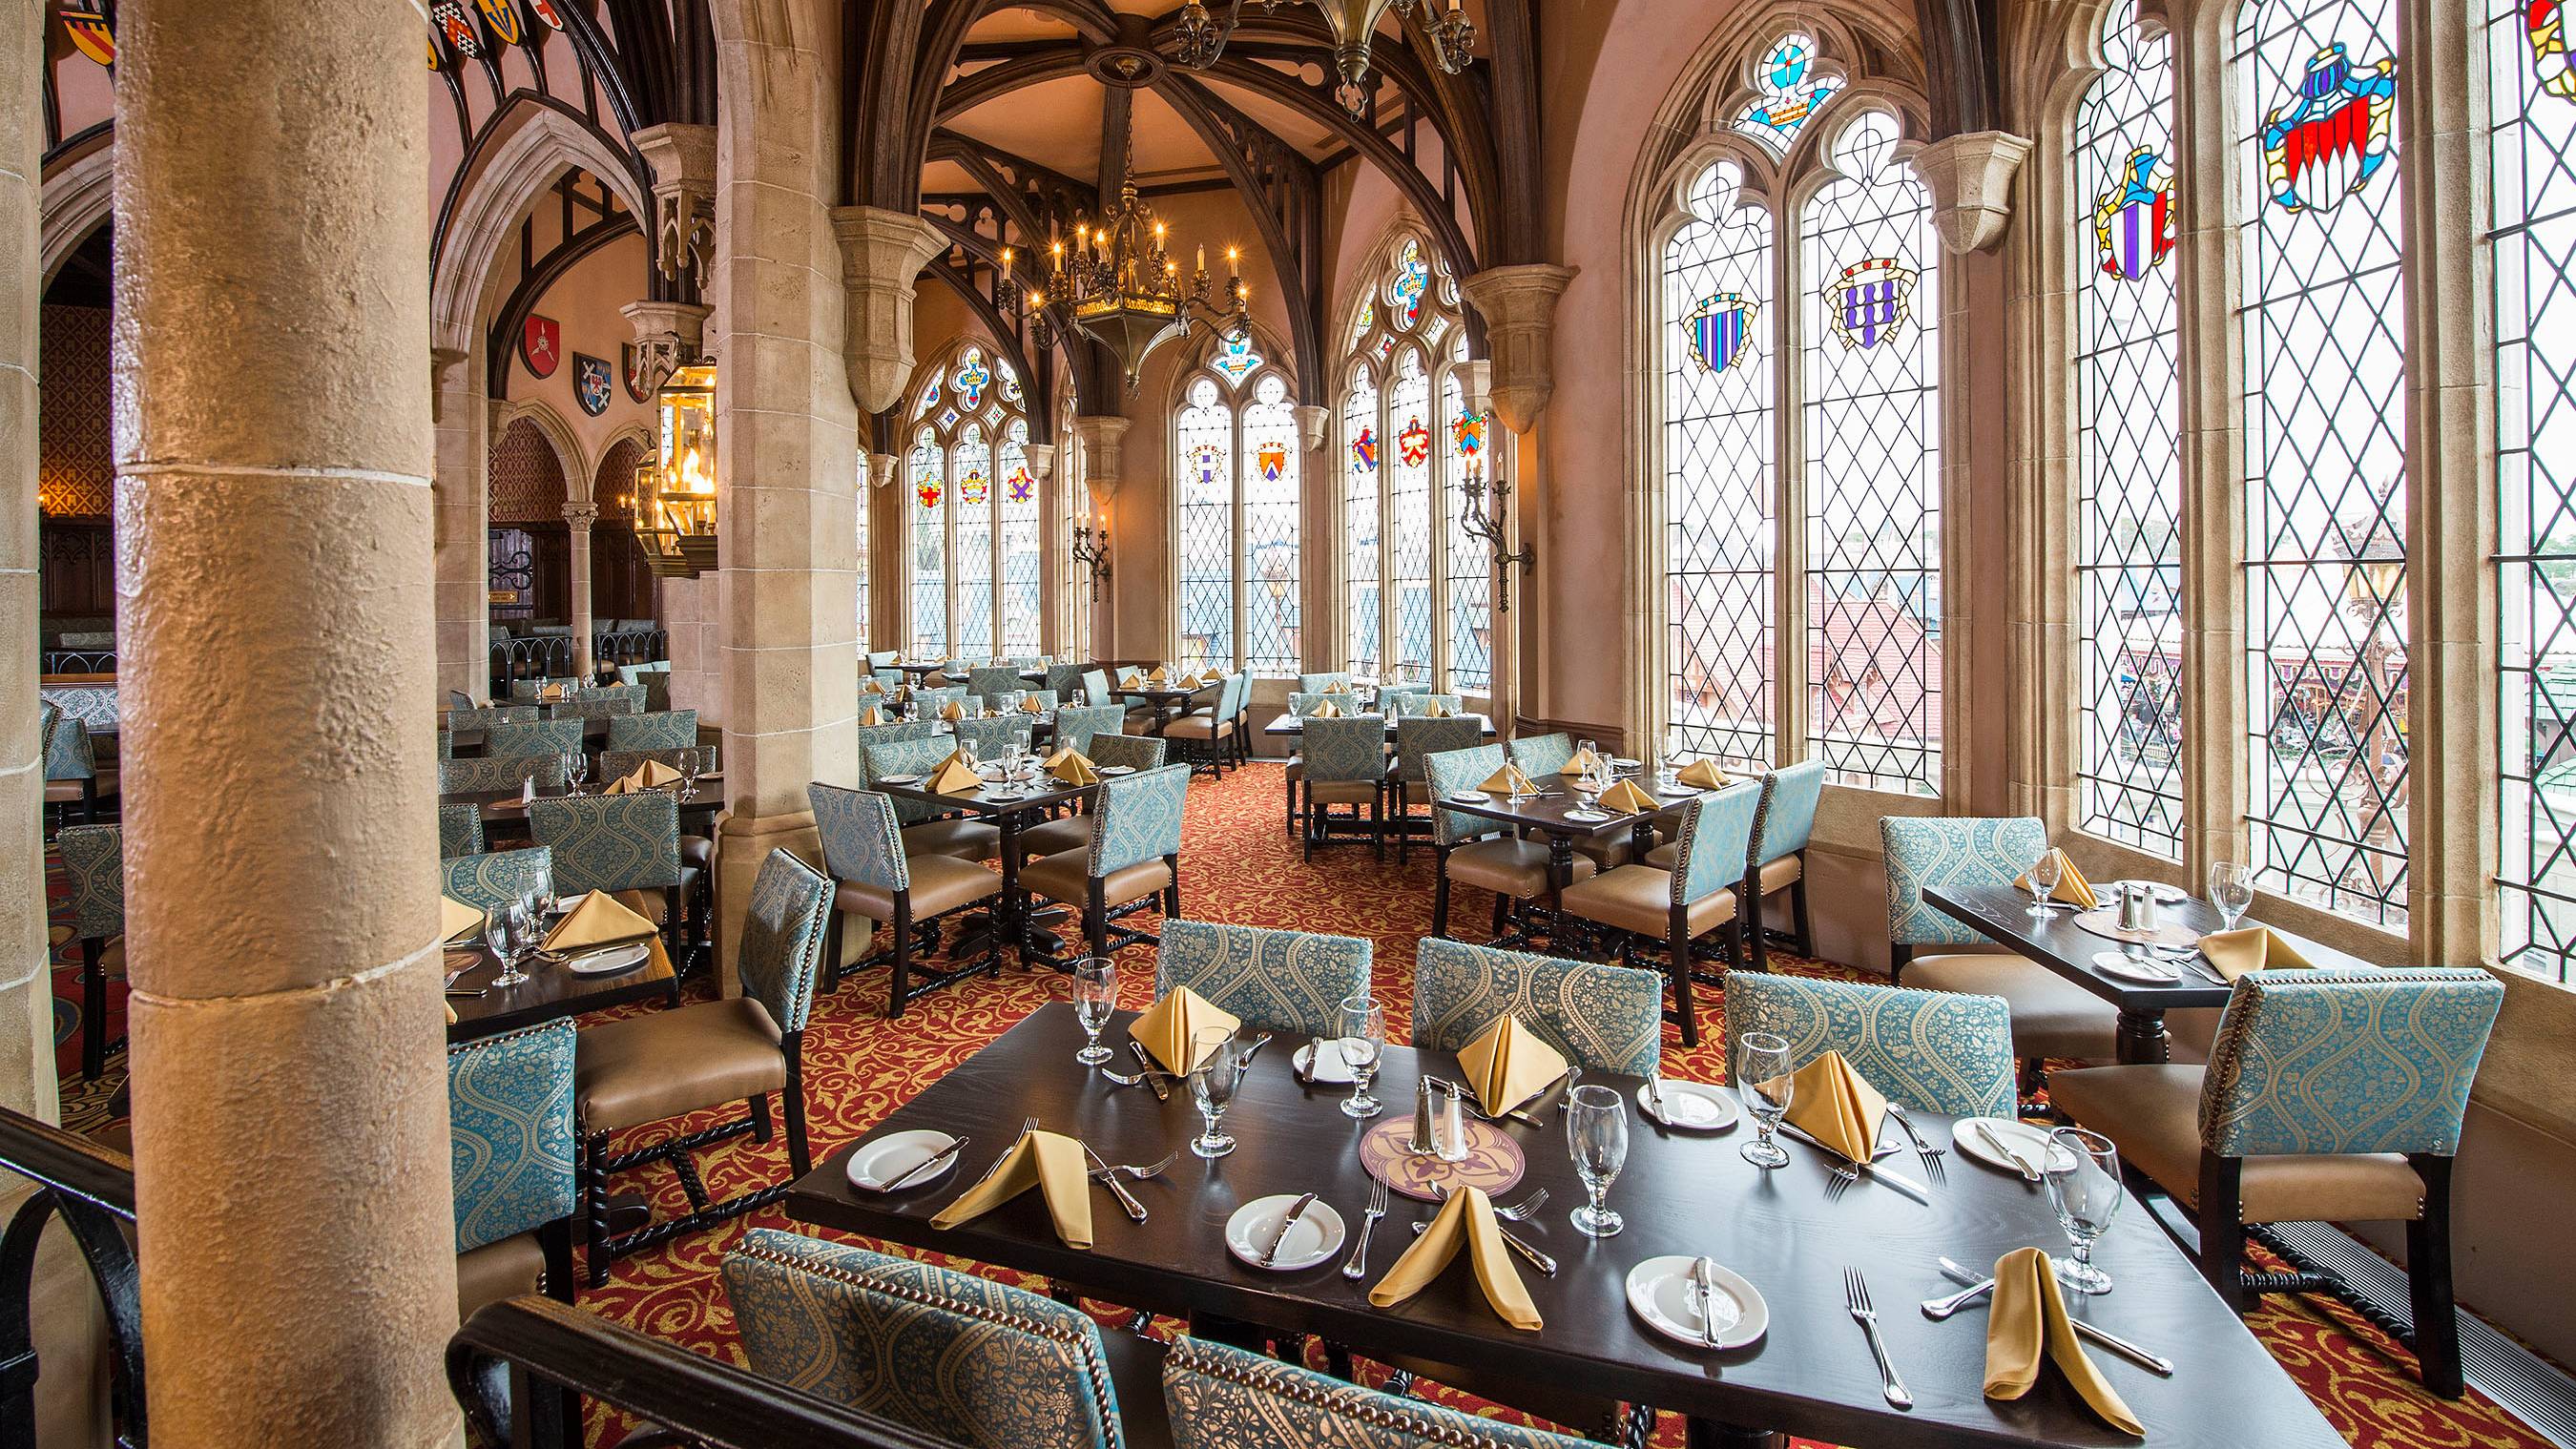 Dinner in the Castle - A+